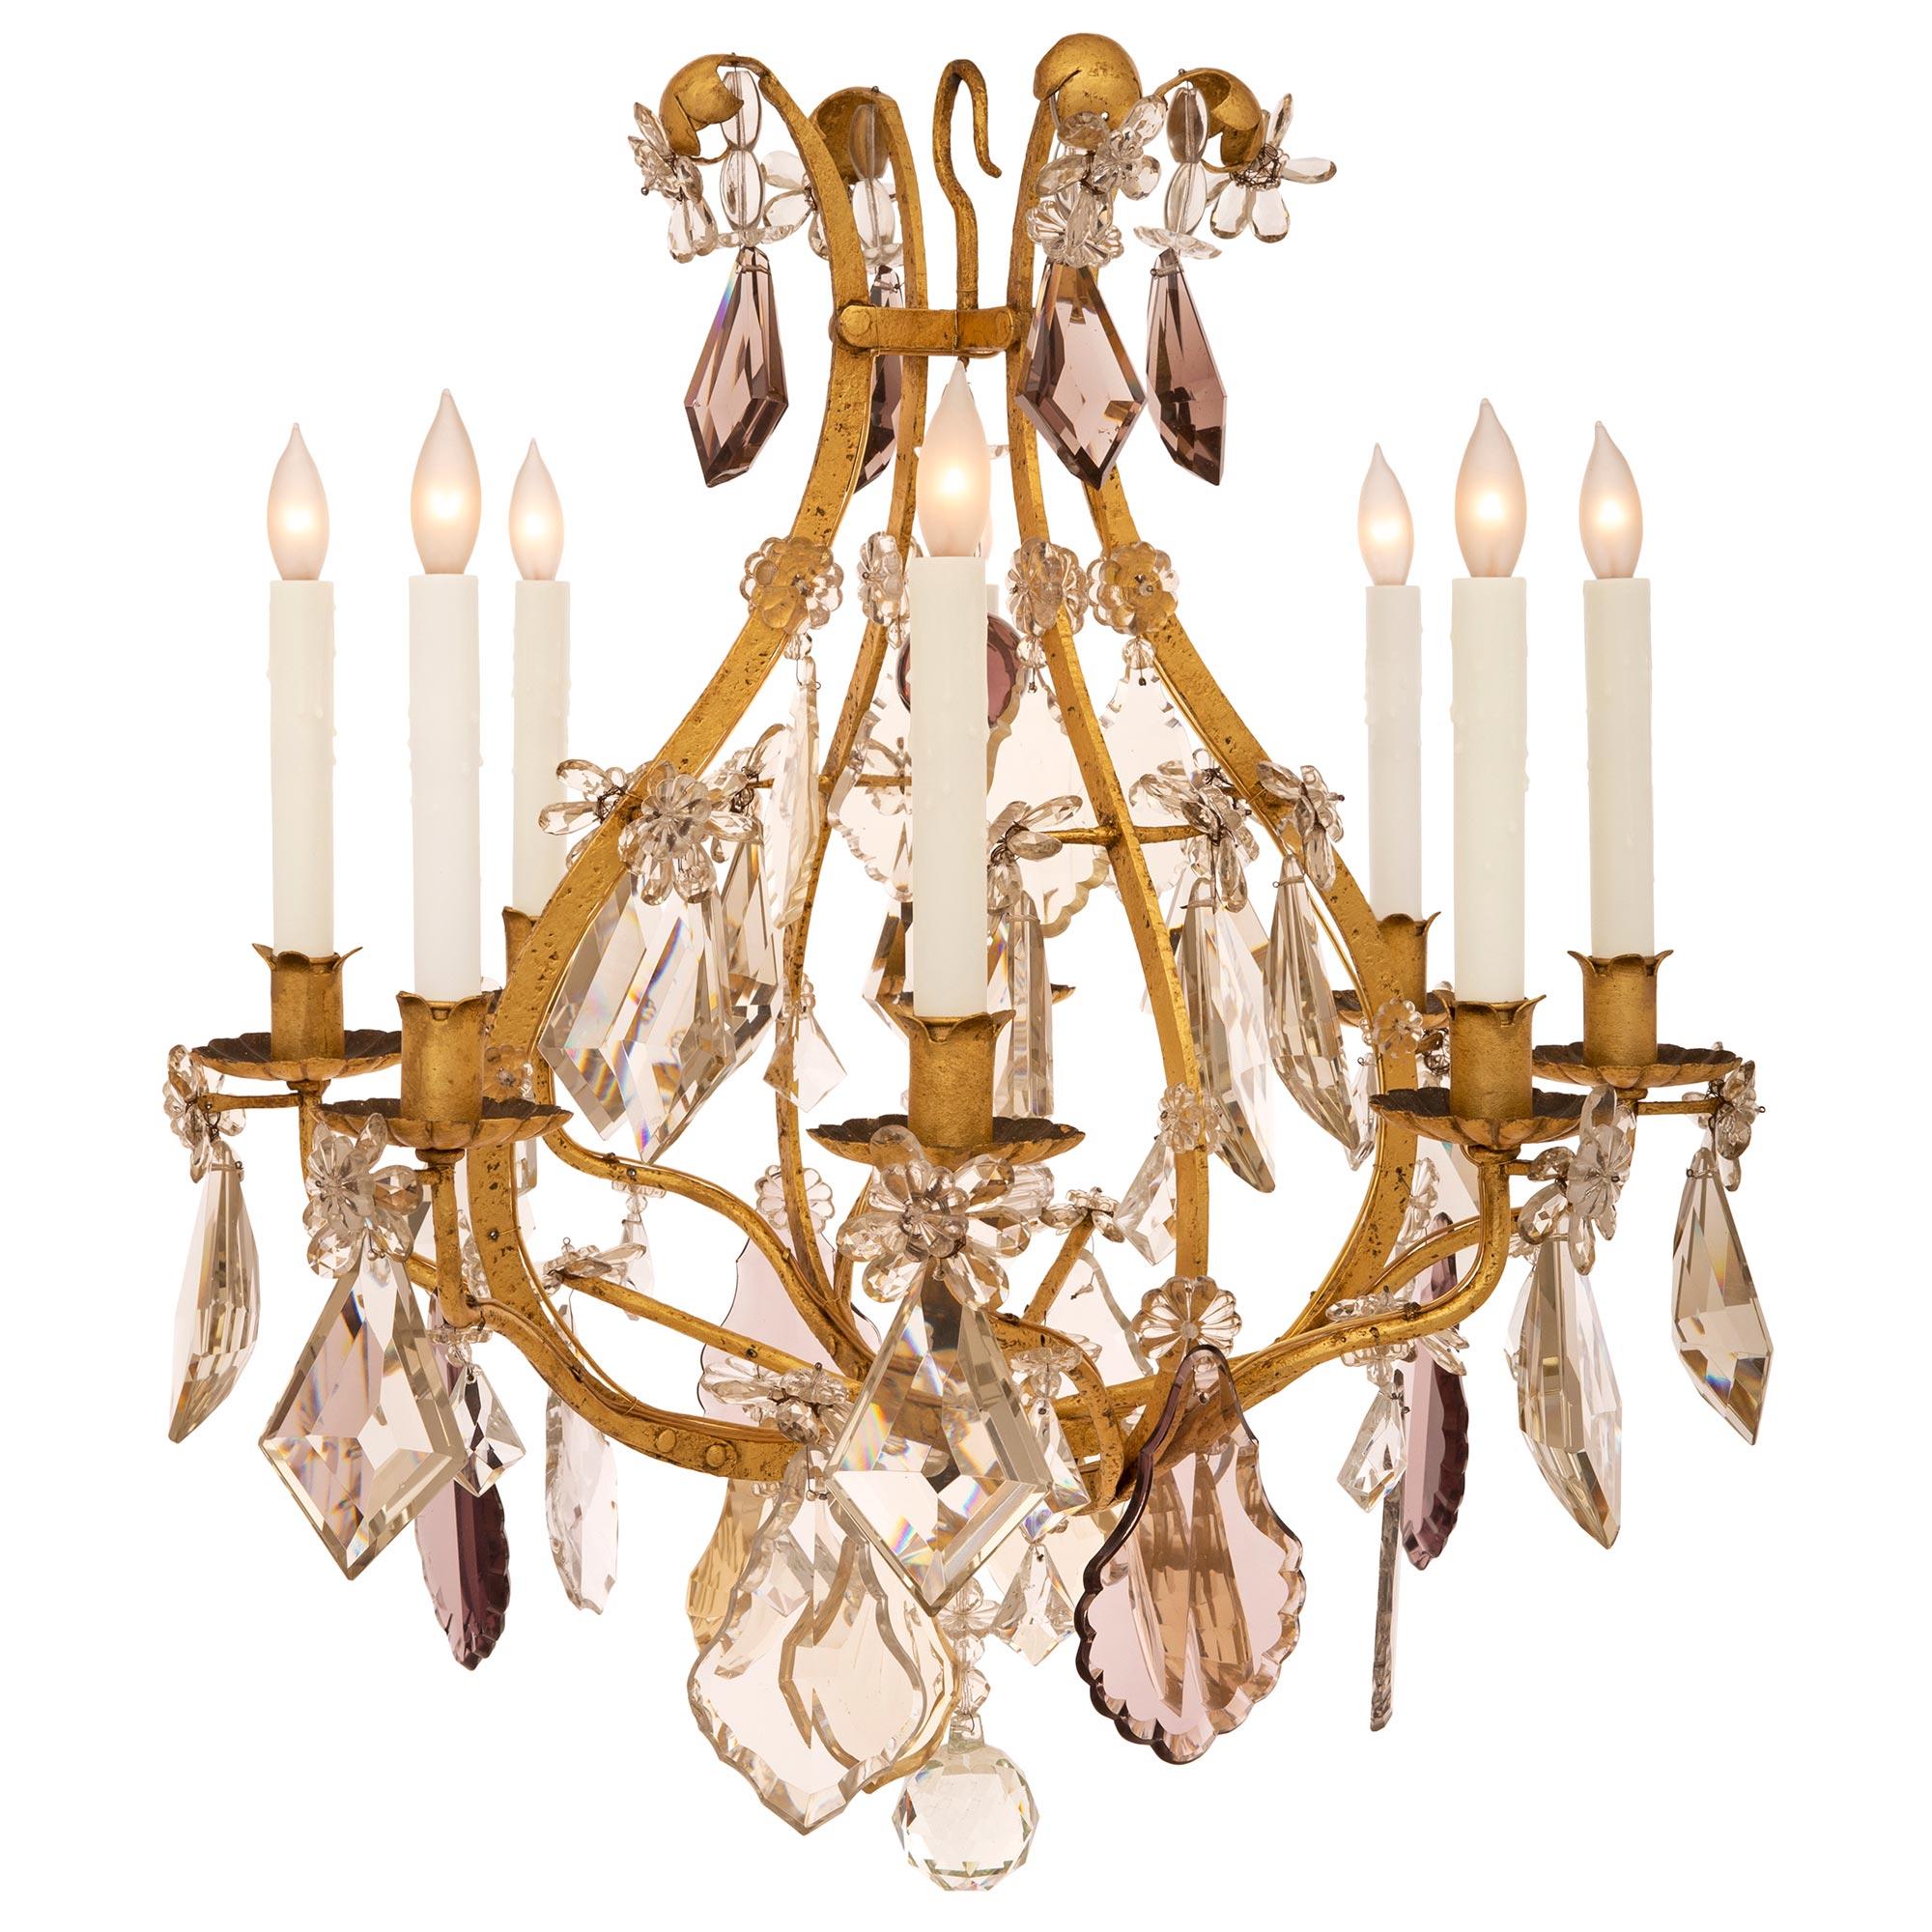 A lovely French 19th century Louis XV st. gilt metal and Baccarat crystal chandelier by Maison Bagues. The chandelier is centered by a beautiful cut crystal ball amidst a superb array of clear, smoked and amethyst colored cut crystal pendants